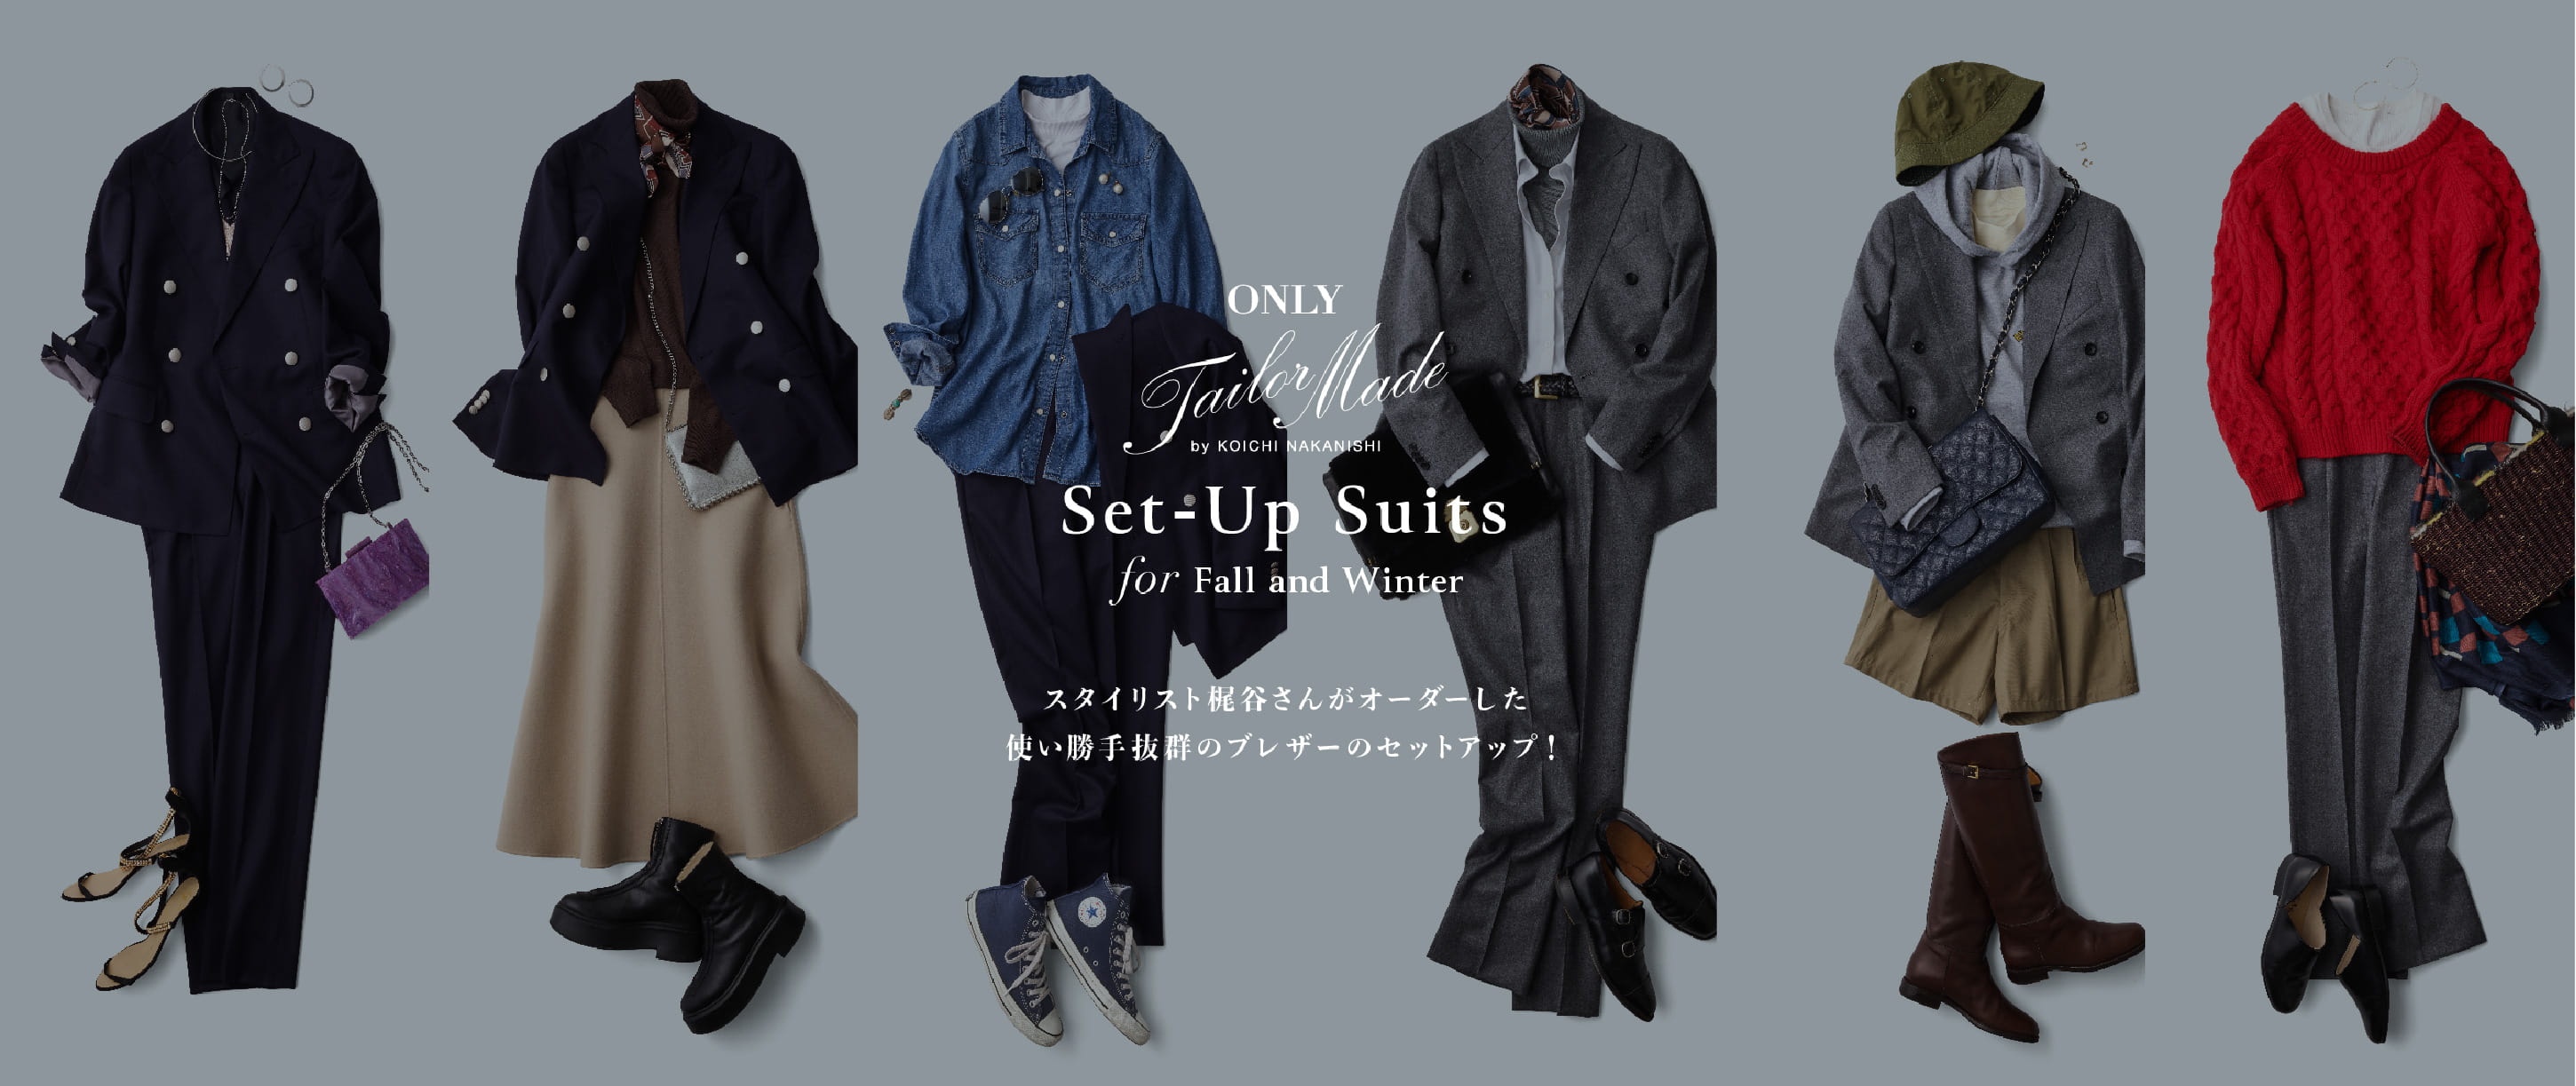 ONLY Tailormade by KOICHI NAKANISHI Set-Up Suits for Fall and Winter スタイリスト梶谷さんがオーダーした使い勝手抜群のブレザーのセットアップ！